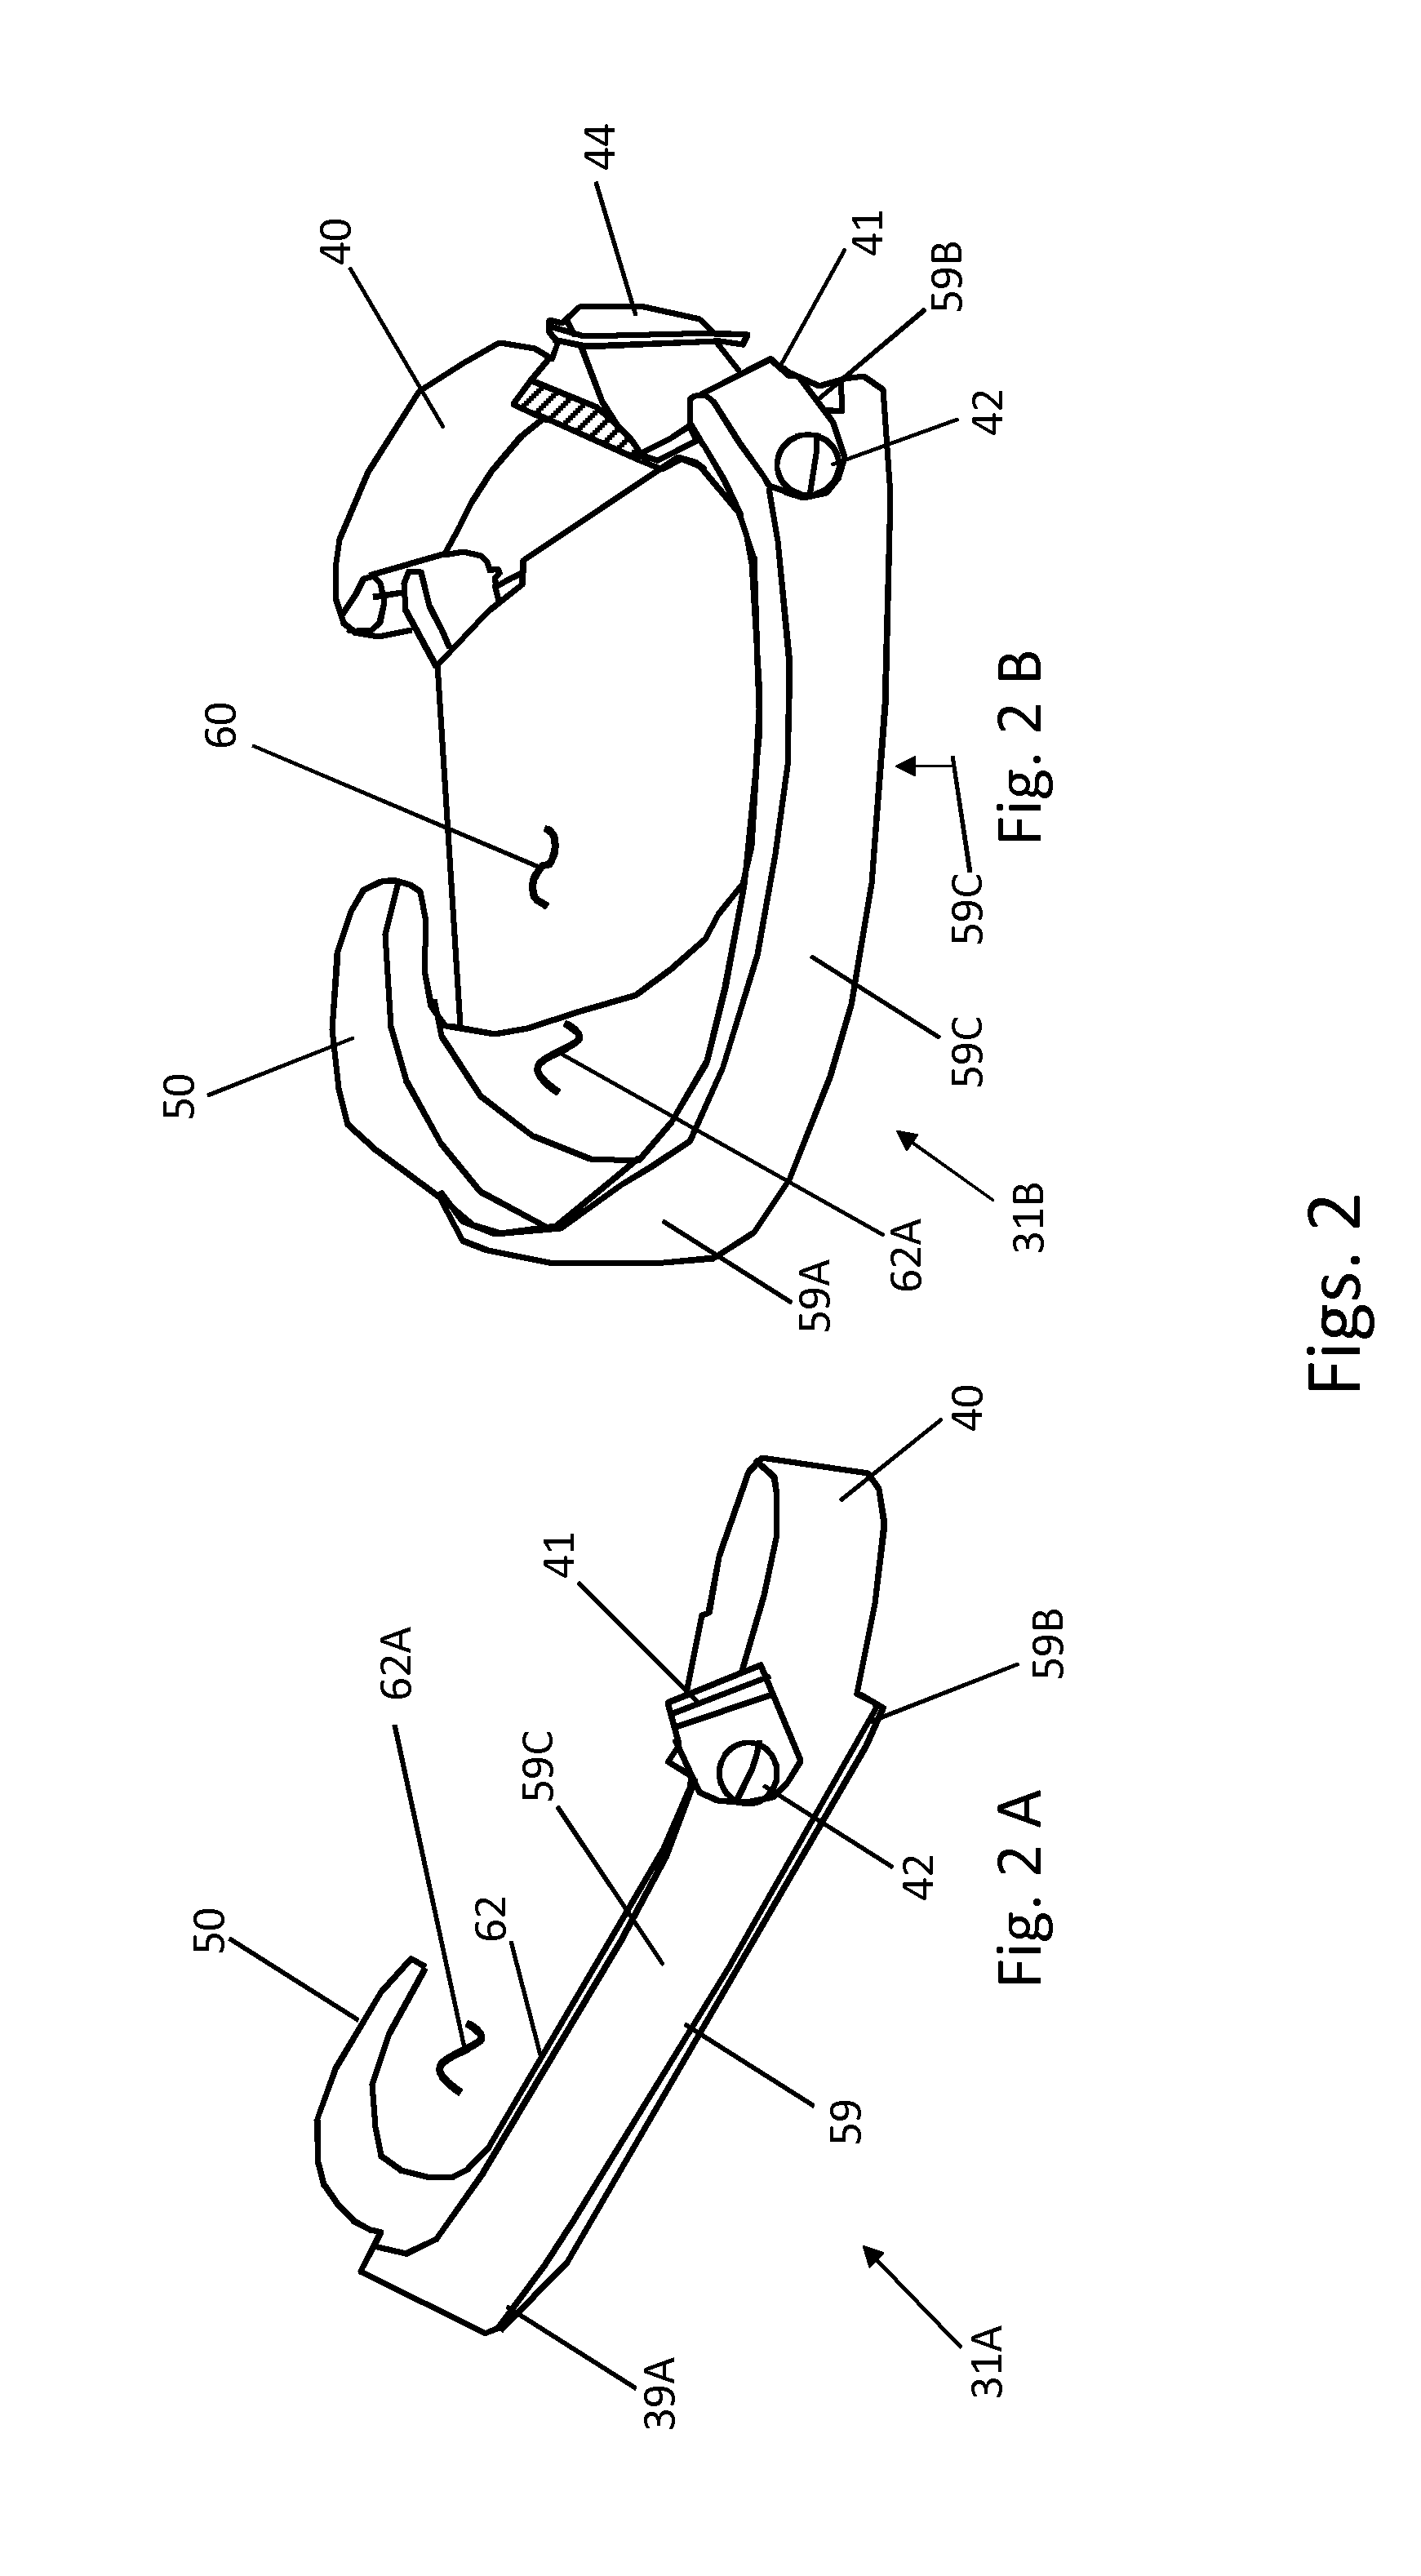 Special step through ambulation aid device